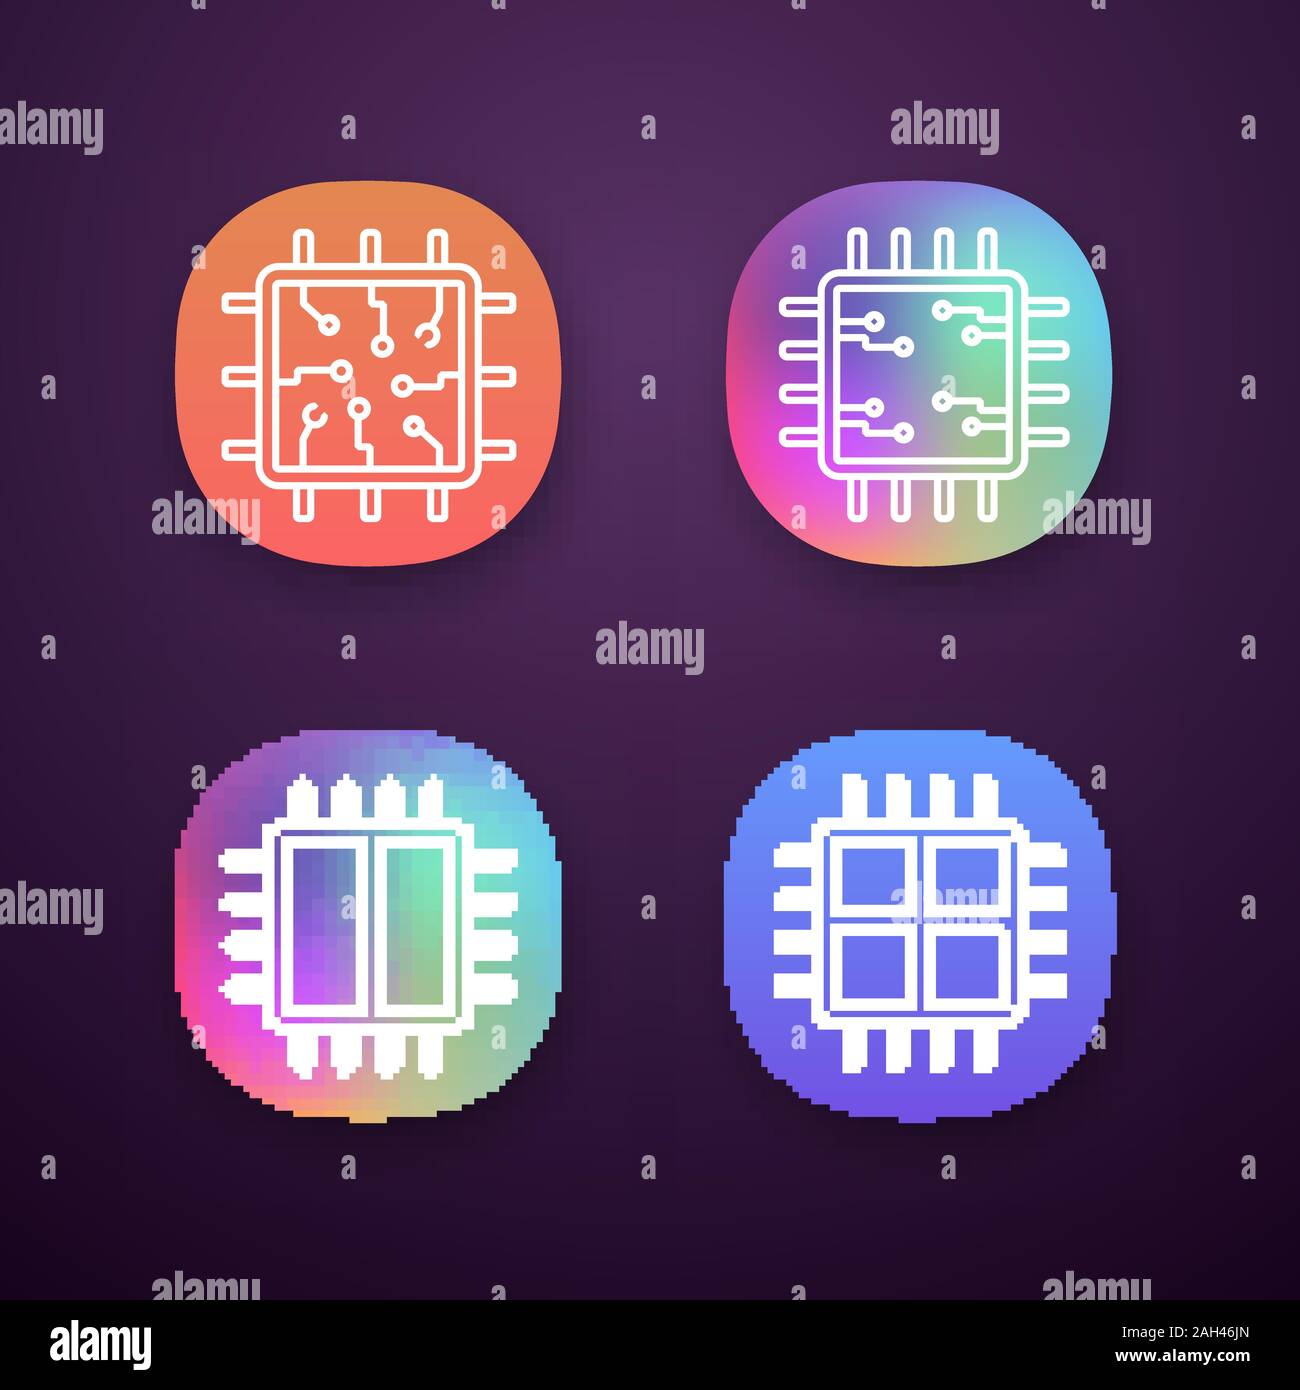 Processors app icons set. UI/UX user interface. Chip, microprocessor, integrated unit, dual and quad core processors. Web or mobile applications. Vect Stock Vector